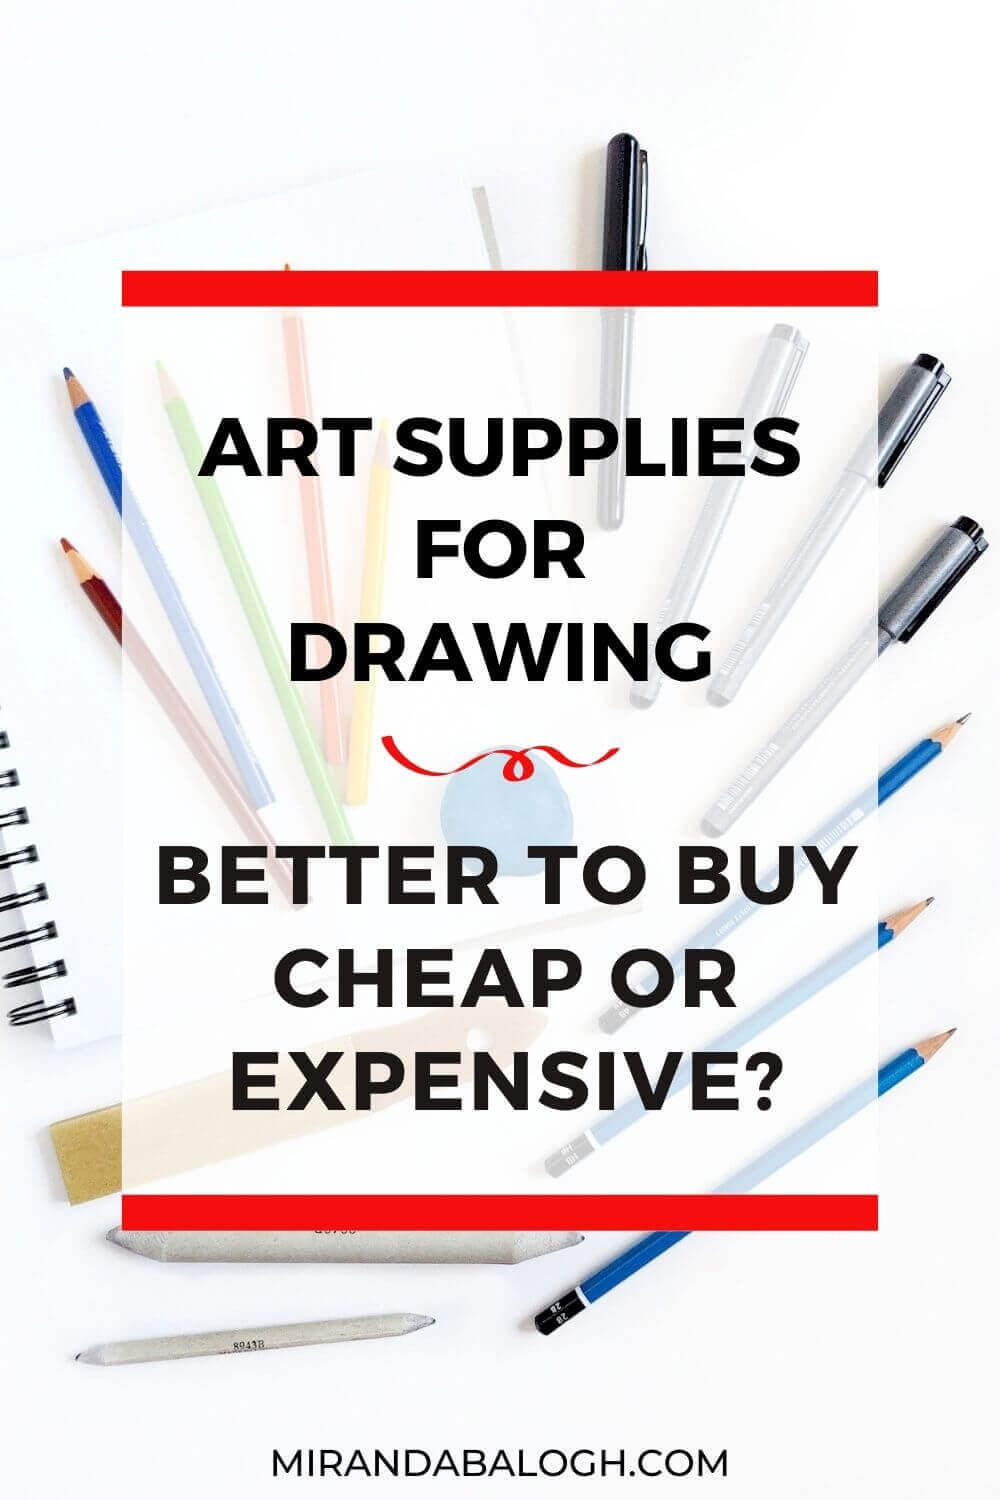 https://mirandabalogh.com/wp-content/uploads/2021/03/Art-Supplies-for-Drawing-Better-to-Buy-Cheap-or-Expensive.jpg